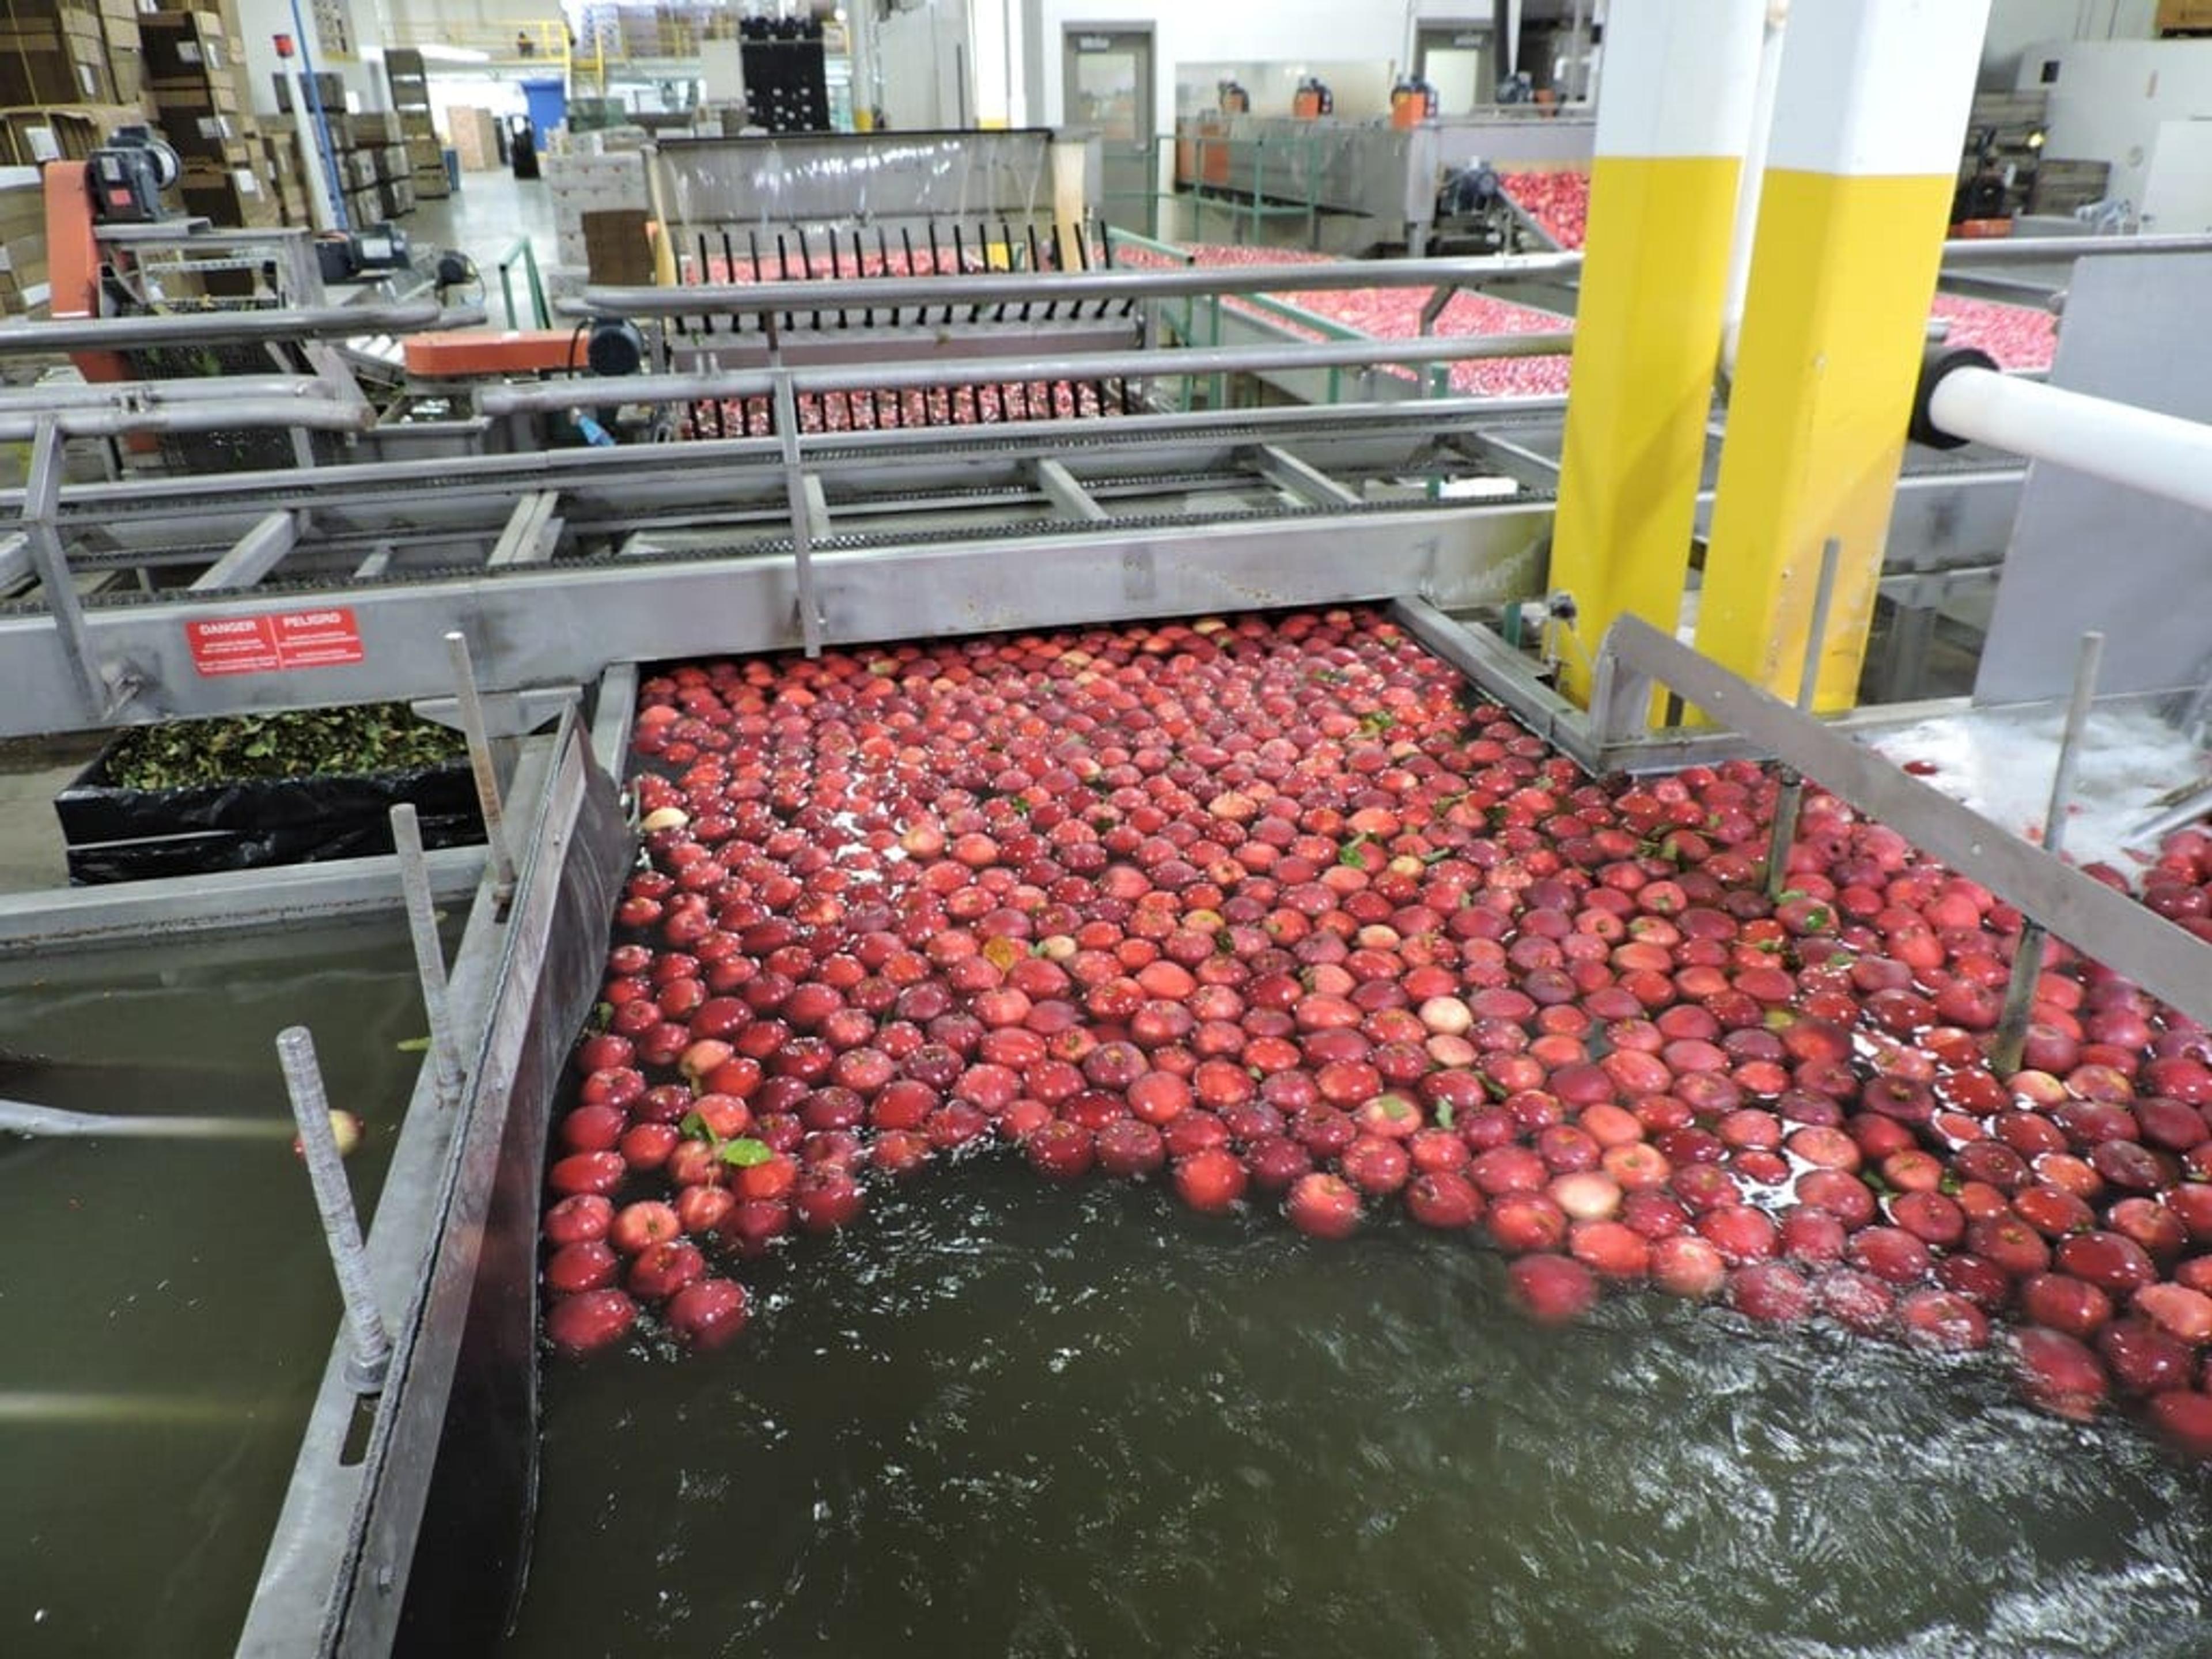 Apples floating down the line.